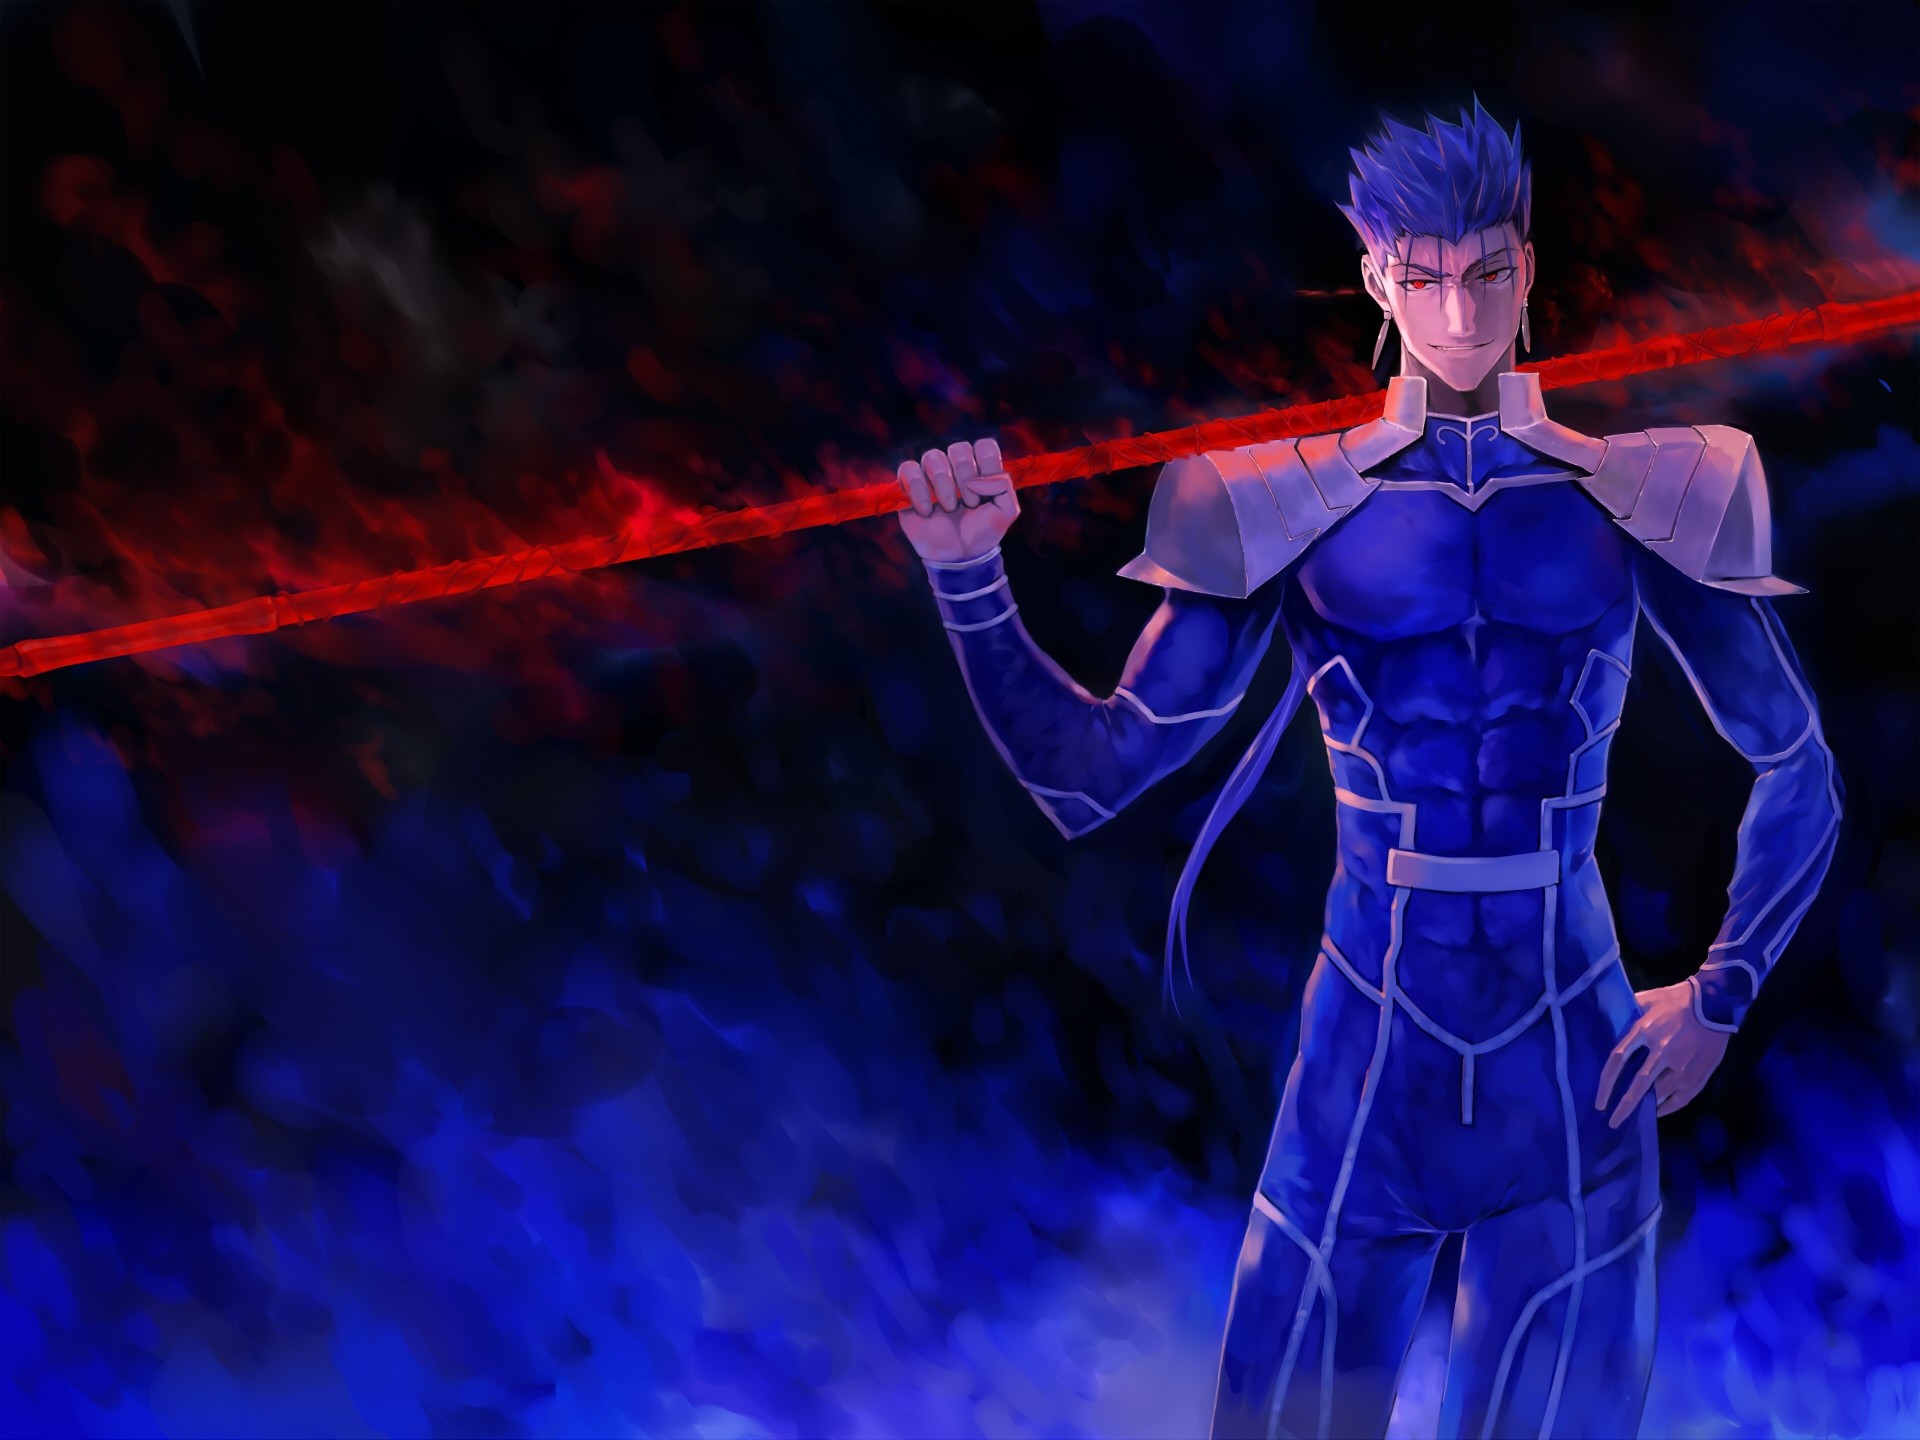 Fate / stay night, Fate / stay night Unlimited Blade Works, Fate /